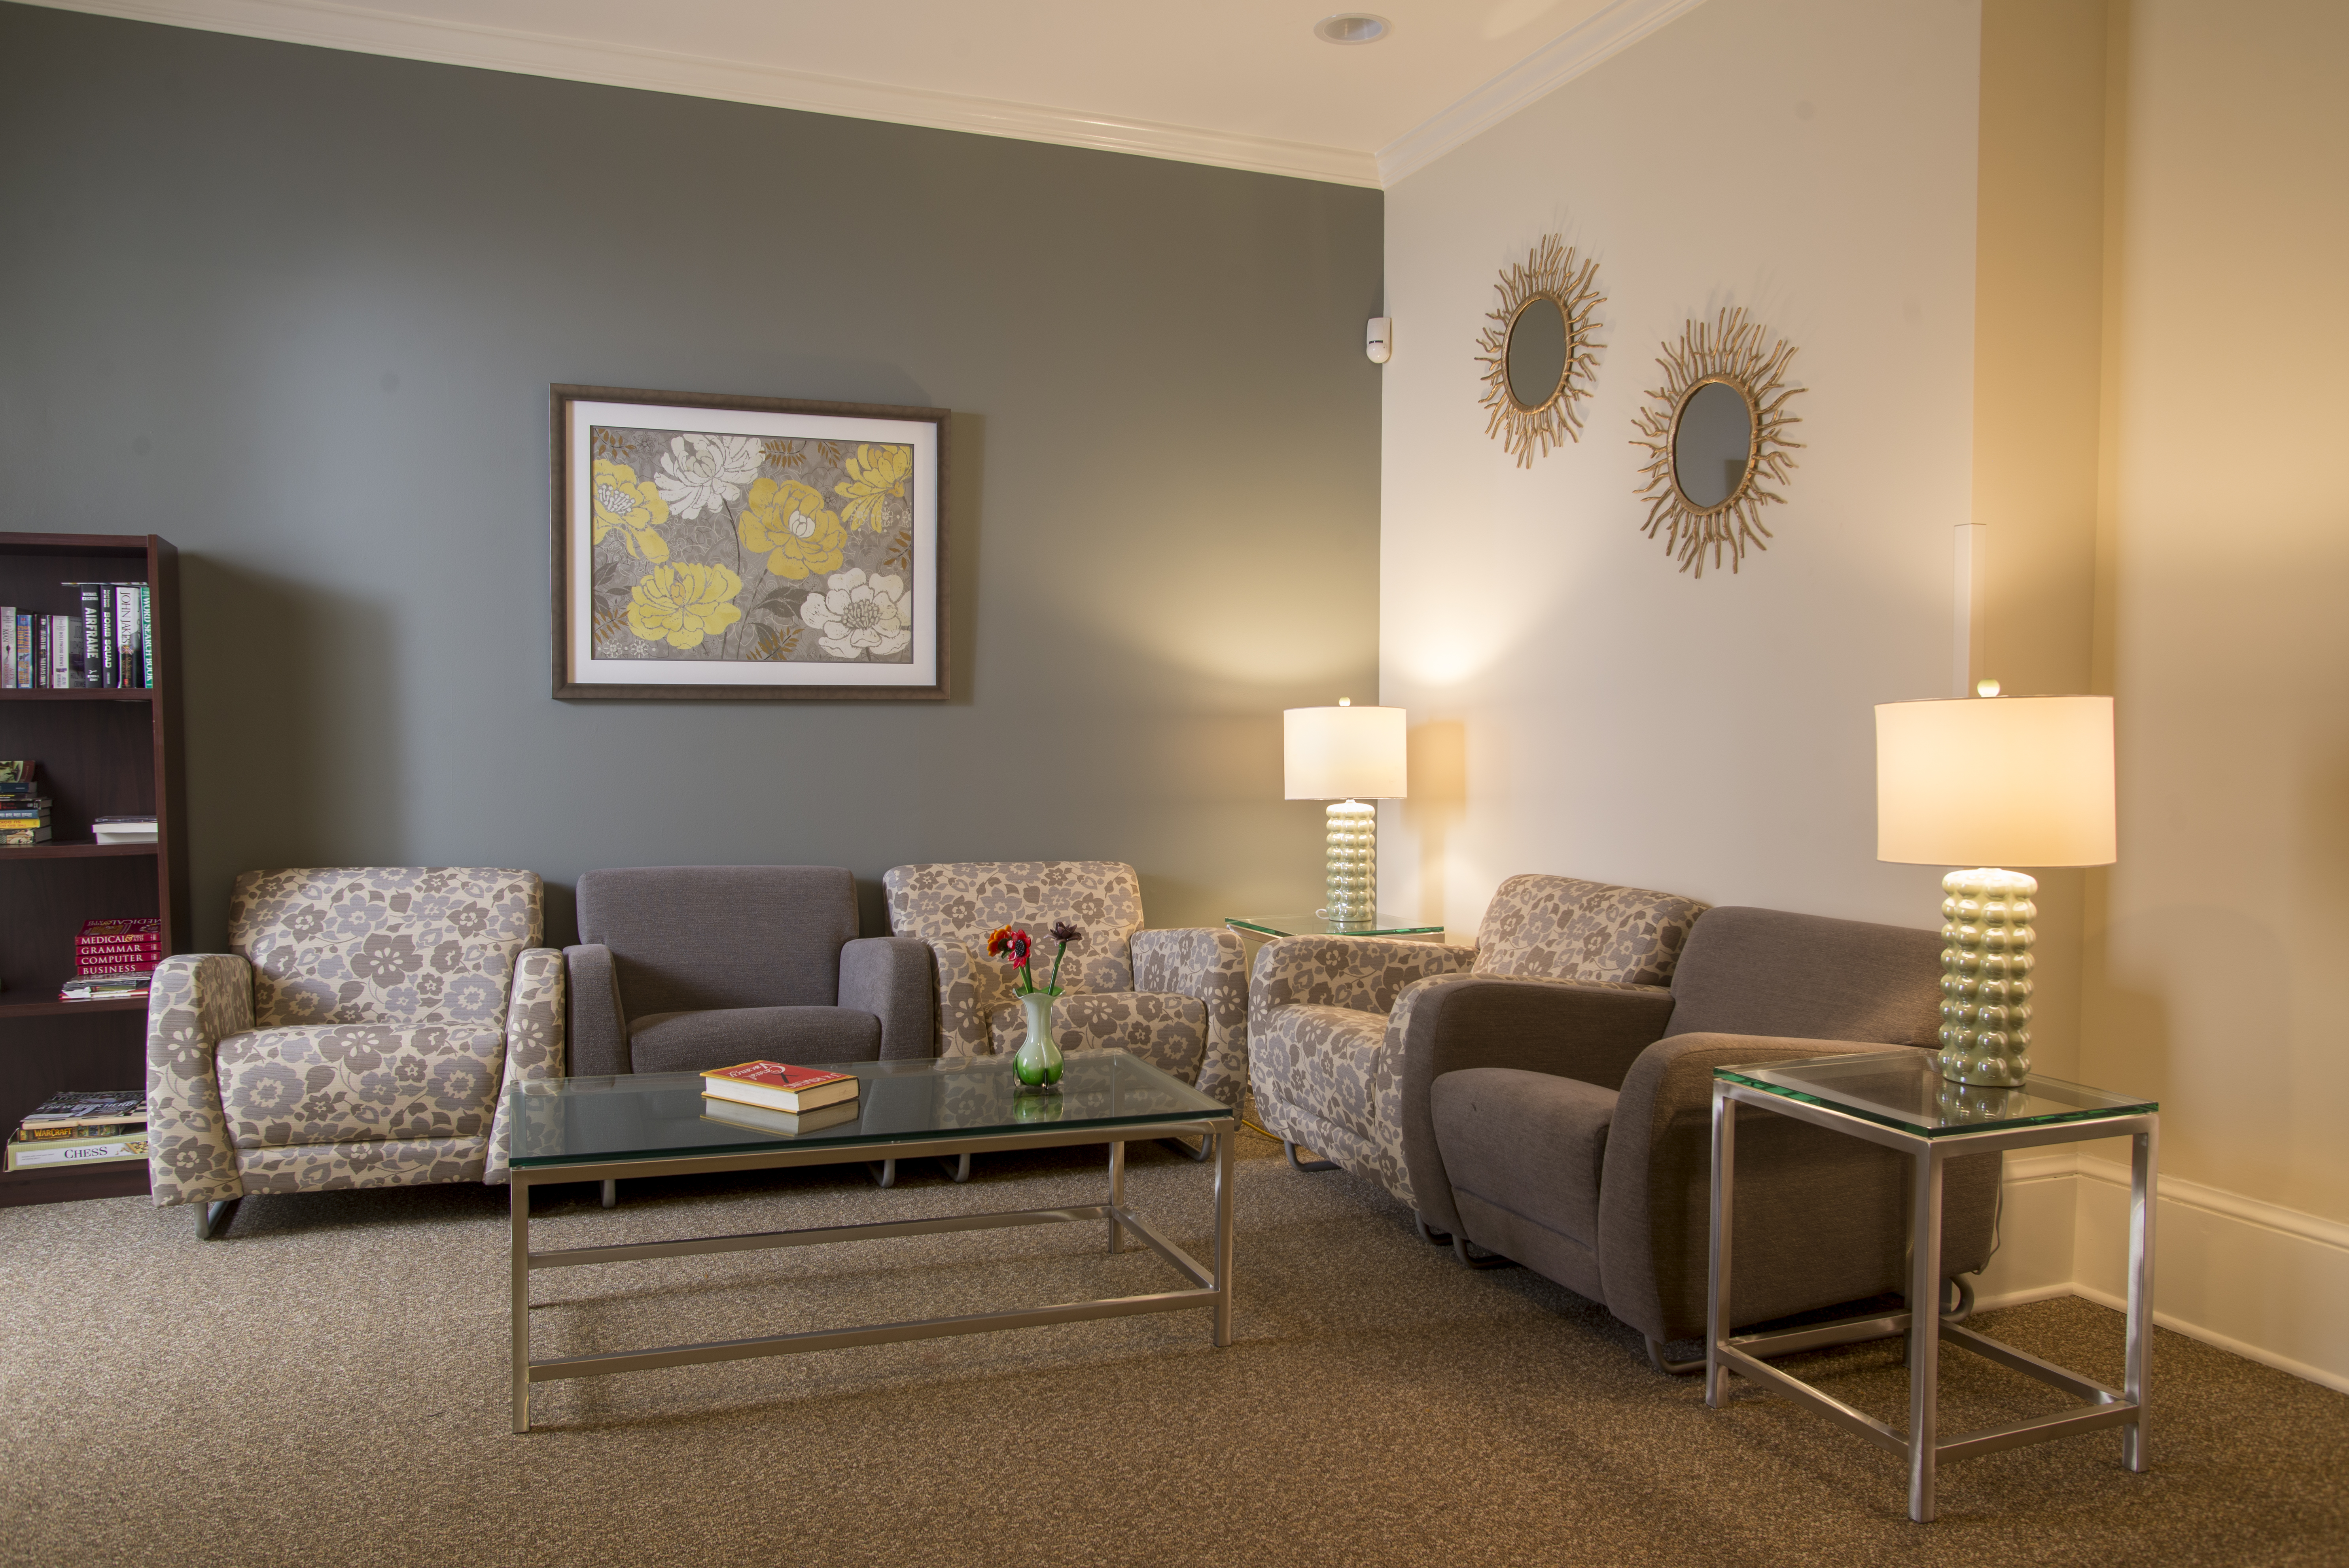 A view of a cozy sitting area in the Hazelden Betty Ford Center in Chicago